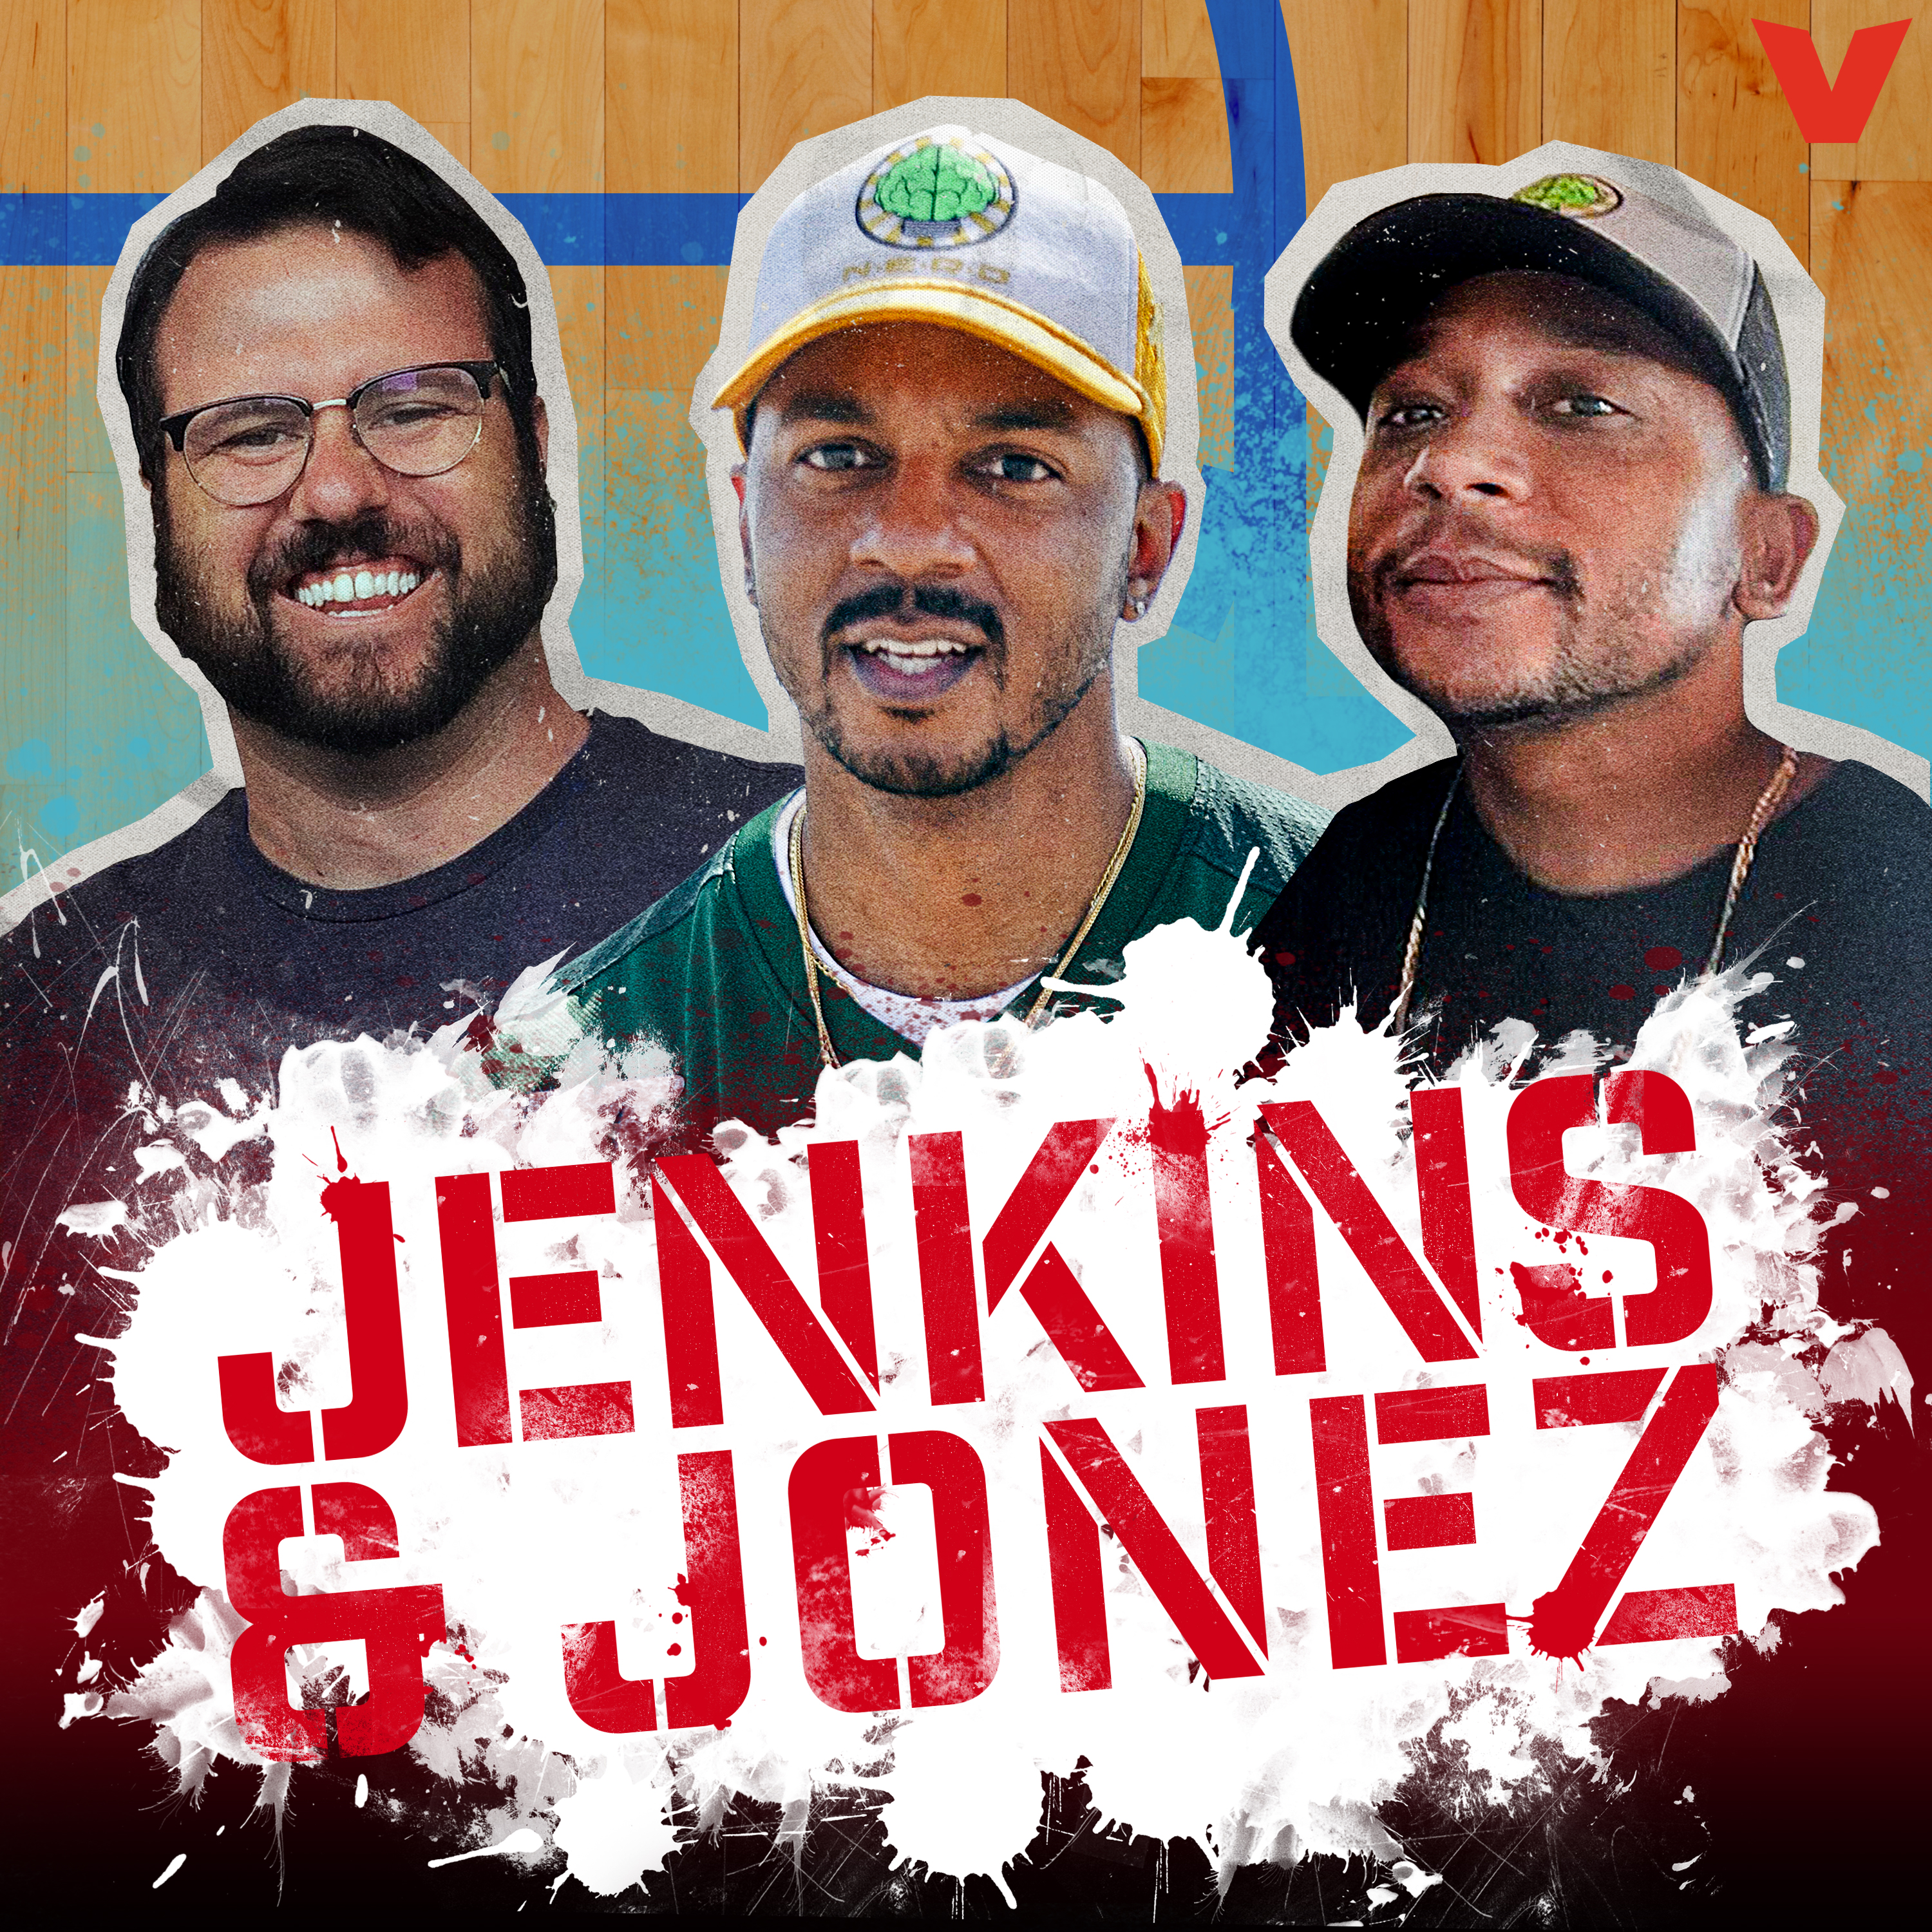 Jenkins and Jonez - Cartoons, Time Zones, and Hater of the Year